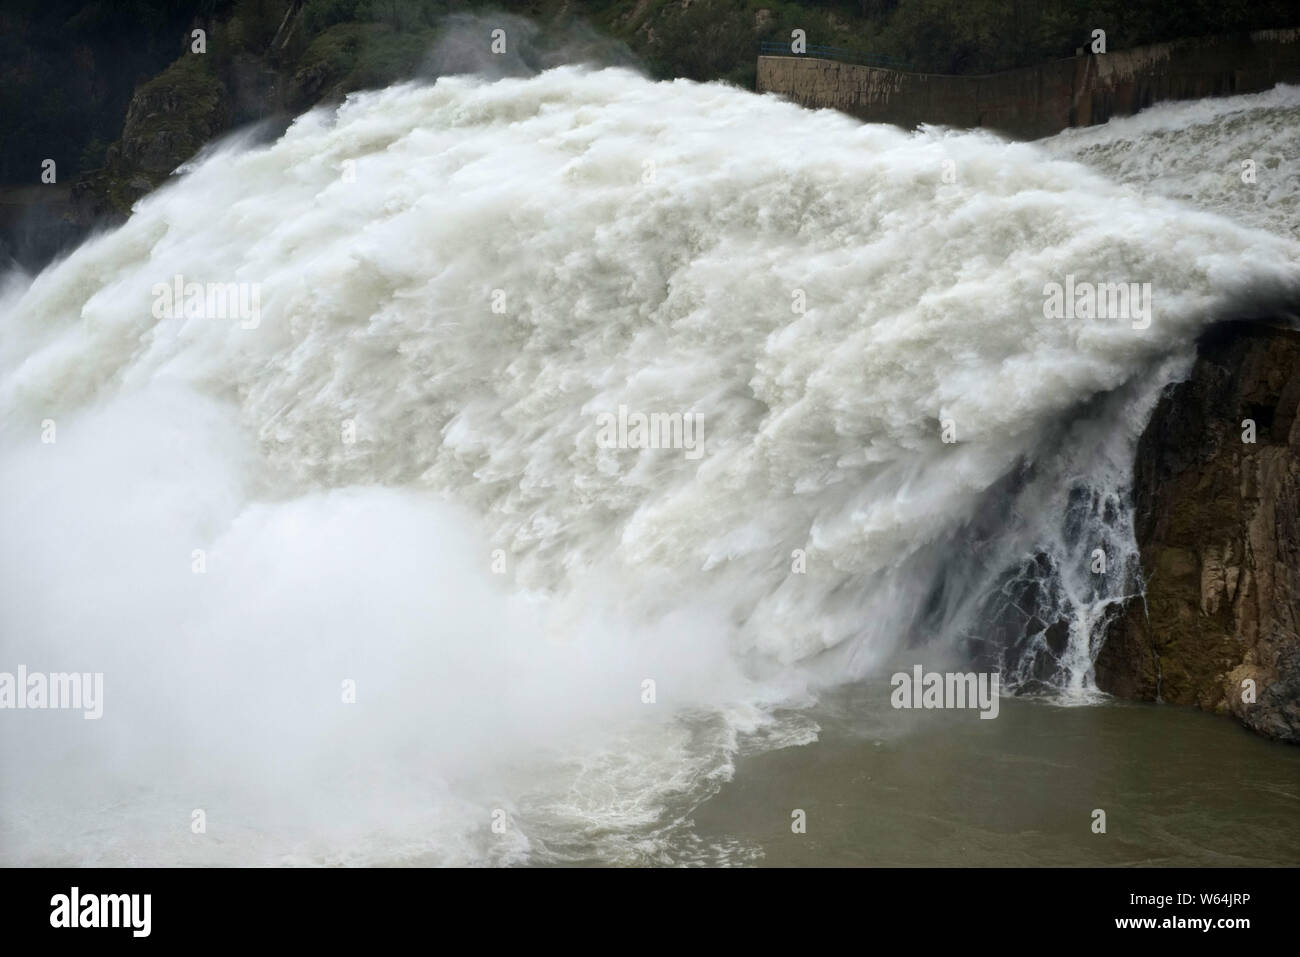 Water gushes out from the Liujiaxia Hydroelectric Station for flood control on the Yellow River in Yongjing county, Linxia Hui Autonomous Prefecture, Stock Photo